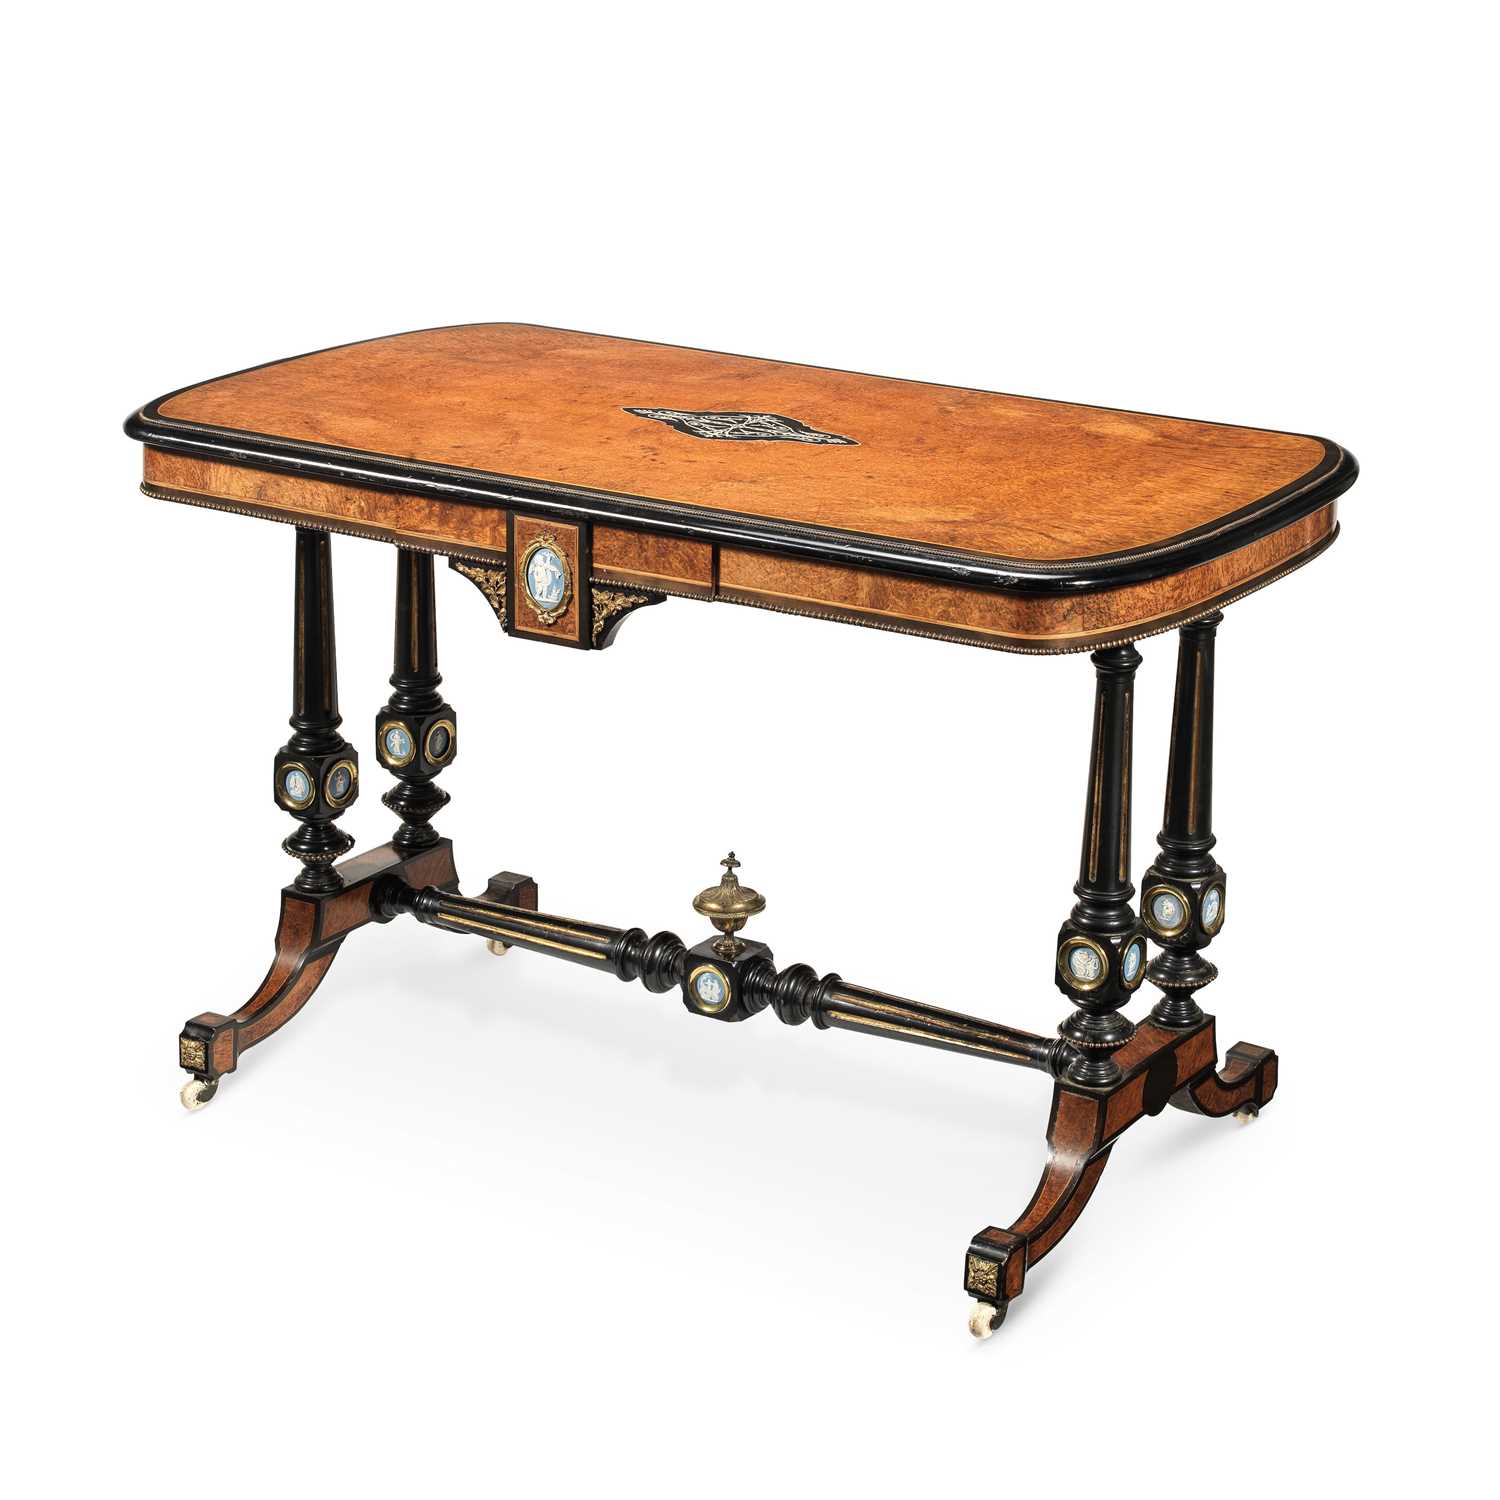 Lot 687 - A VICTORIAN JASPERWARE INSET, ORMOLU-MOUNTED AND IVORY-INLAID AMBOYNA AND EBONISED WRITING TABLE